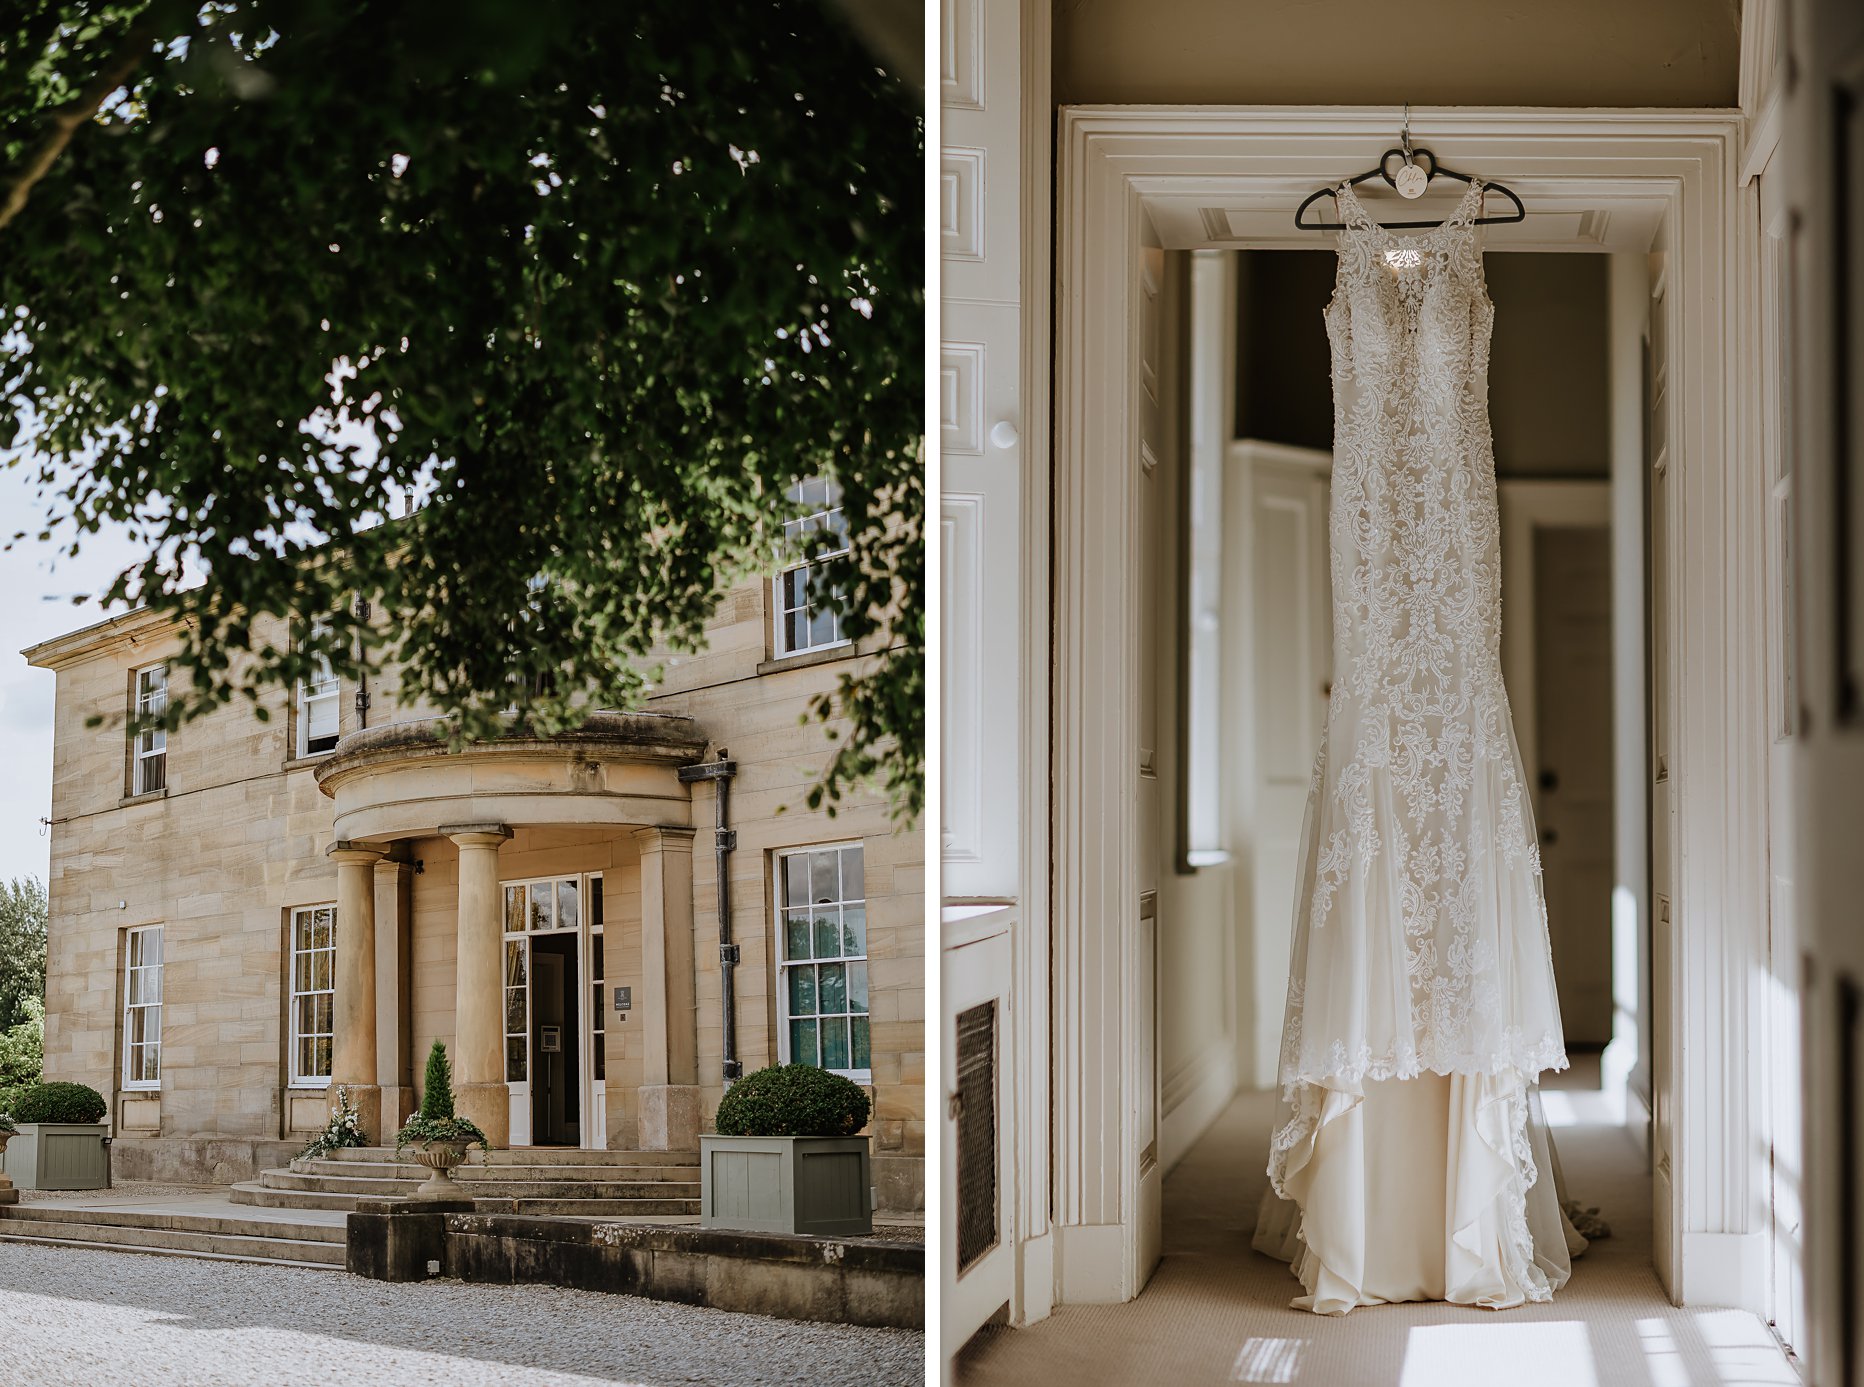 First image shows the exterior of Saltmarshe Hall. Second image shows long lace sleeveless wedding dress hung up on a door frame.